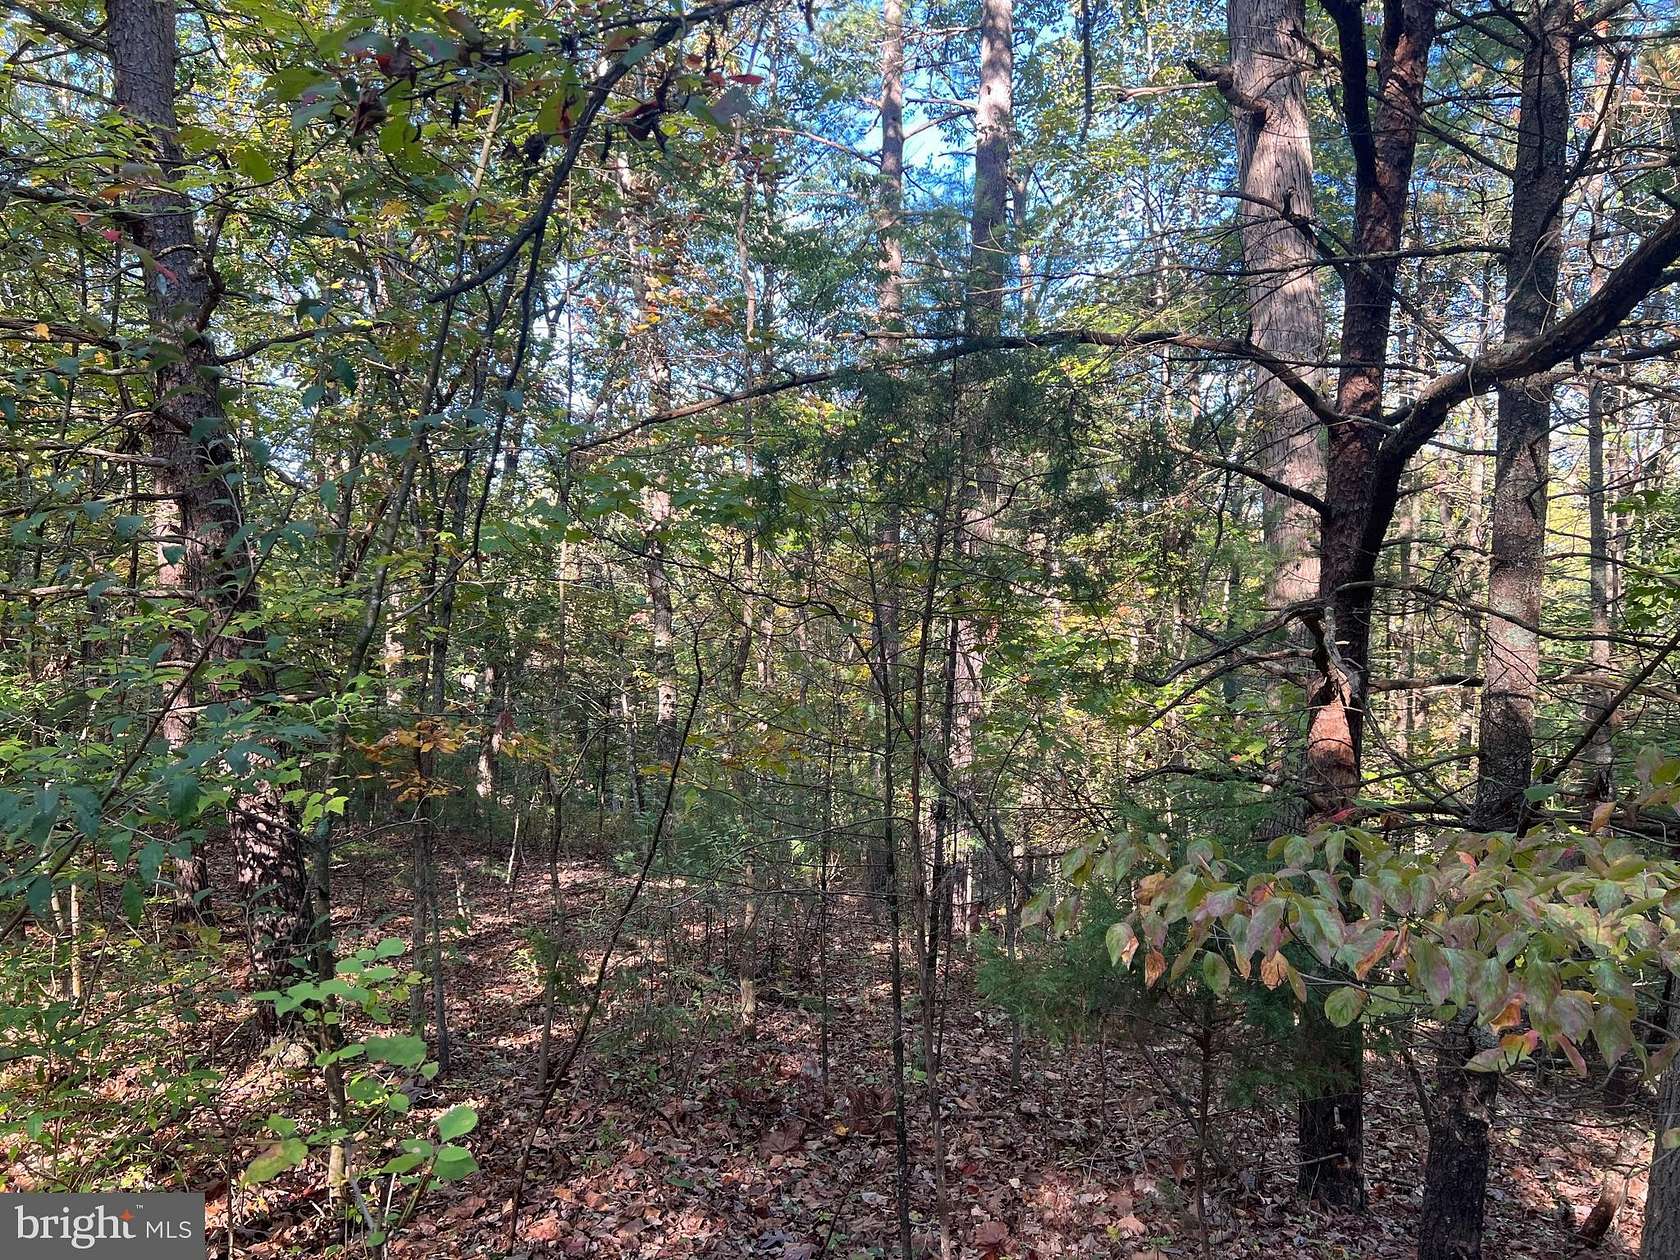 0.35 Acres of Land for Sale in Basye, Virginia